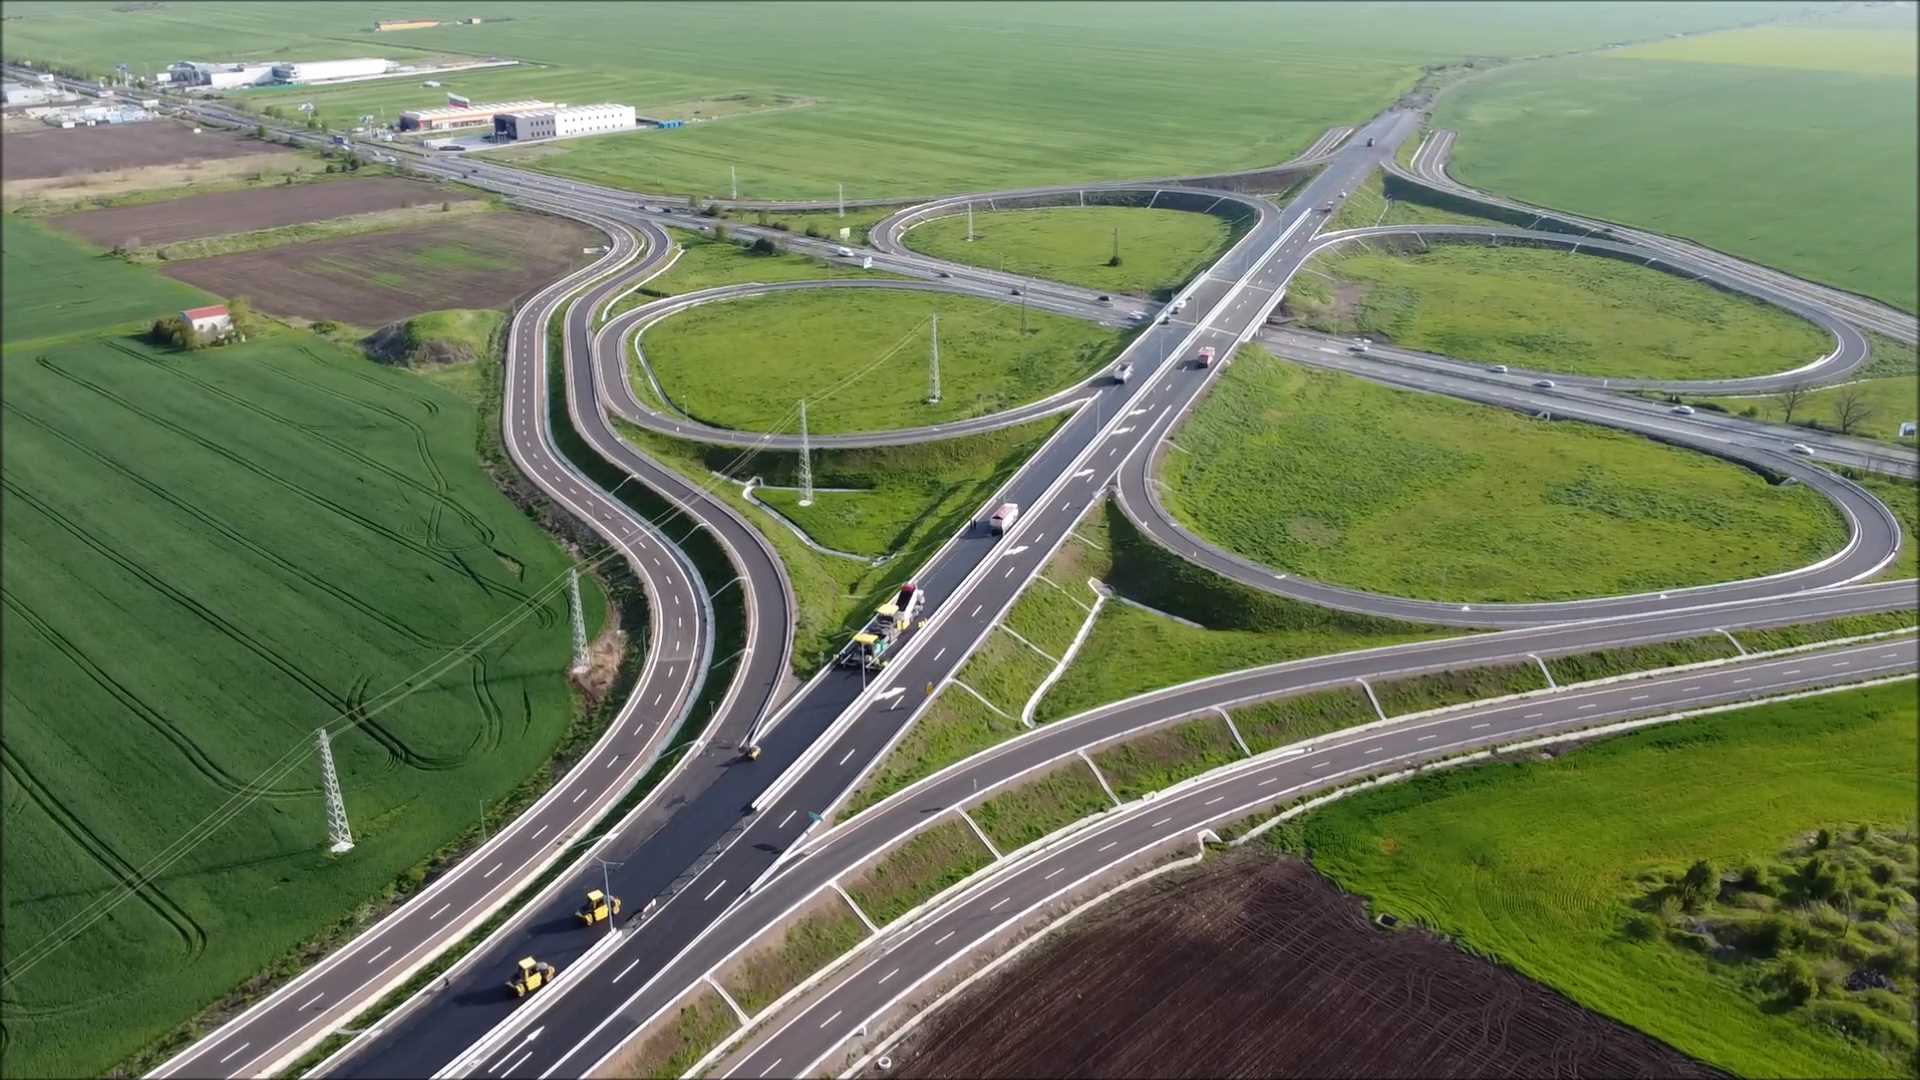 Construction of a bypass road of the city of Burgas from km 230+700 on road I-9 “Sarafovo-Burgas” to km 493+550 on road I-6 “Vetren-Burgas”